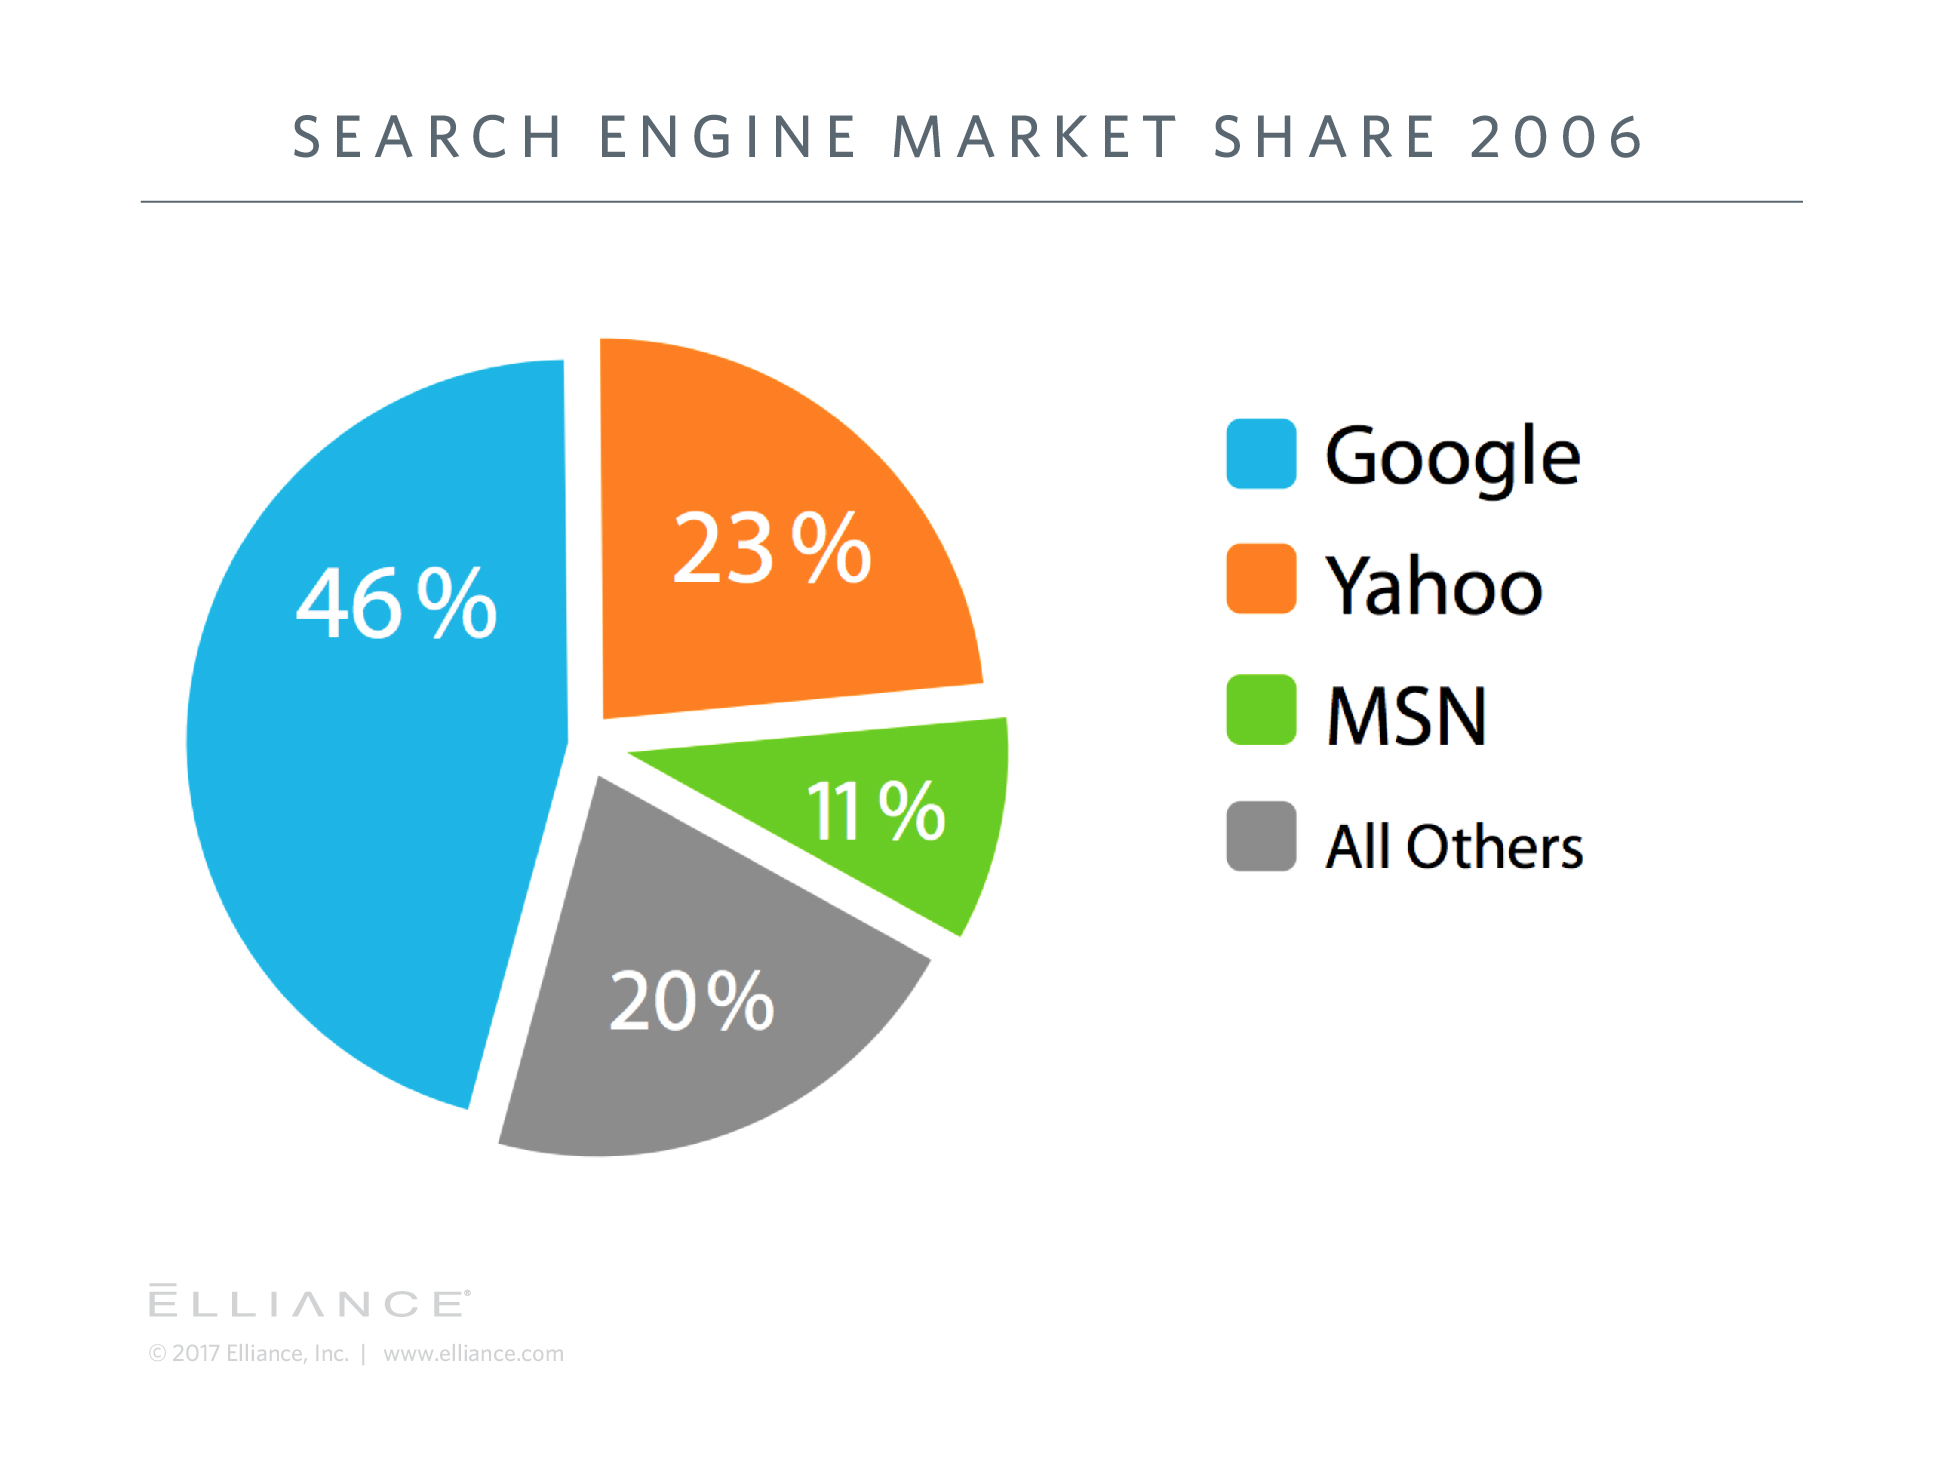 Search Market Share 2006